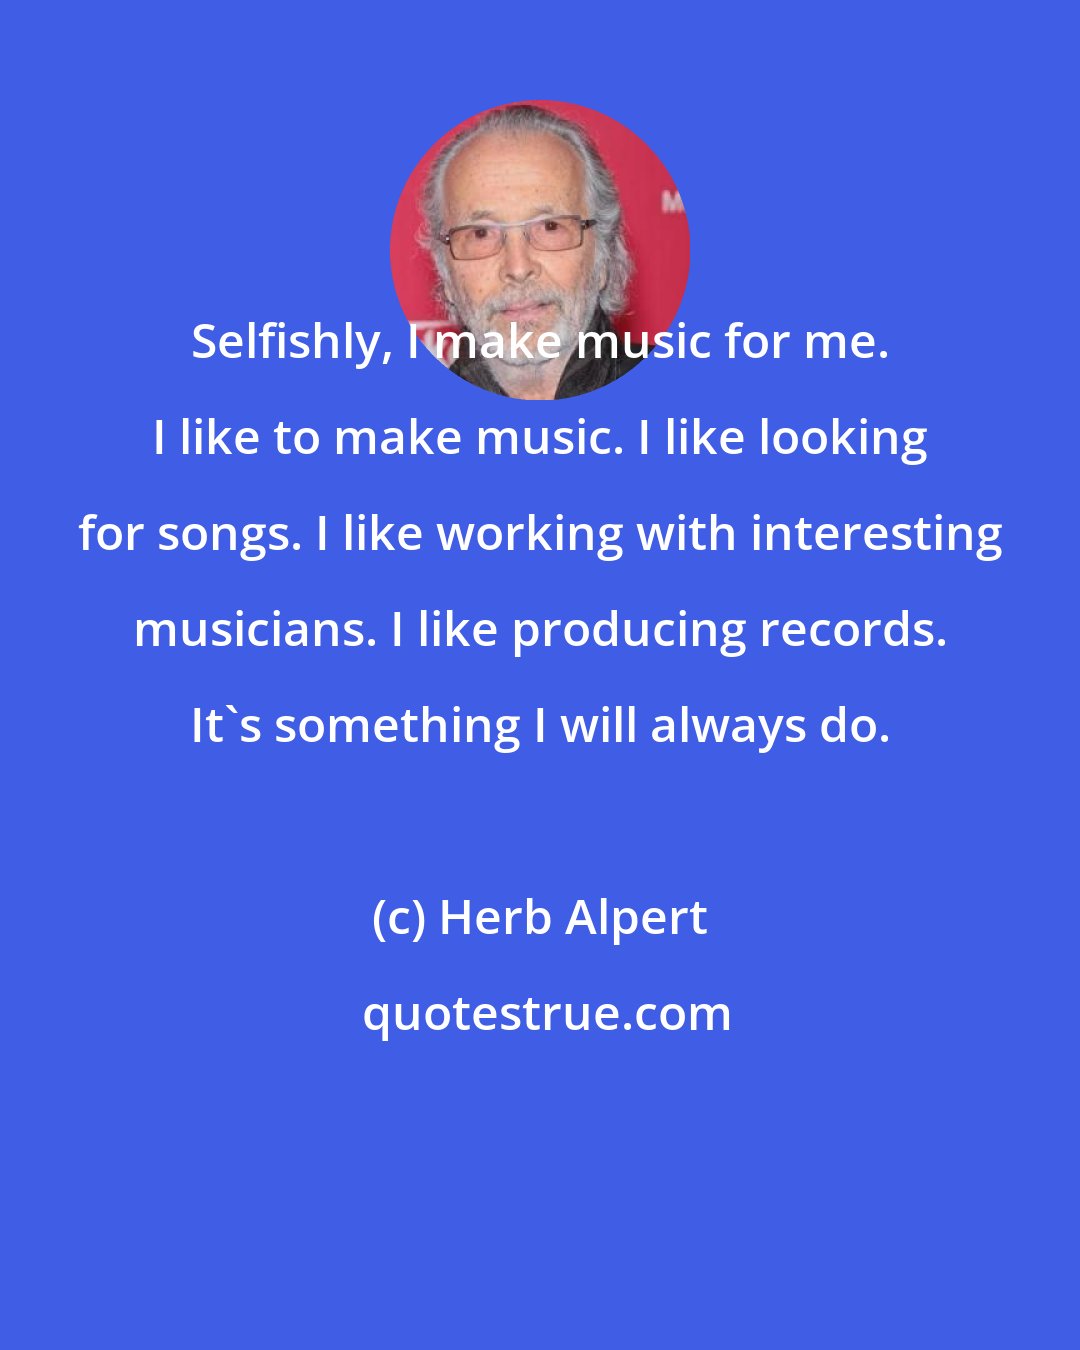 Herb Alpert: Selfishly, I make music for me. I like to make music. I like looking for songs. I like working with interesting musicians. I like producing records. It's something I will always do.